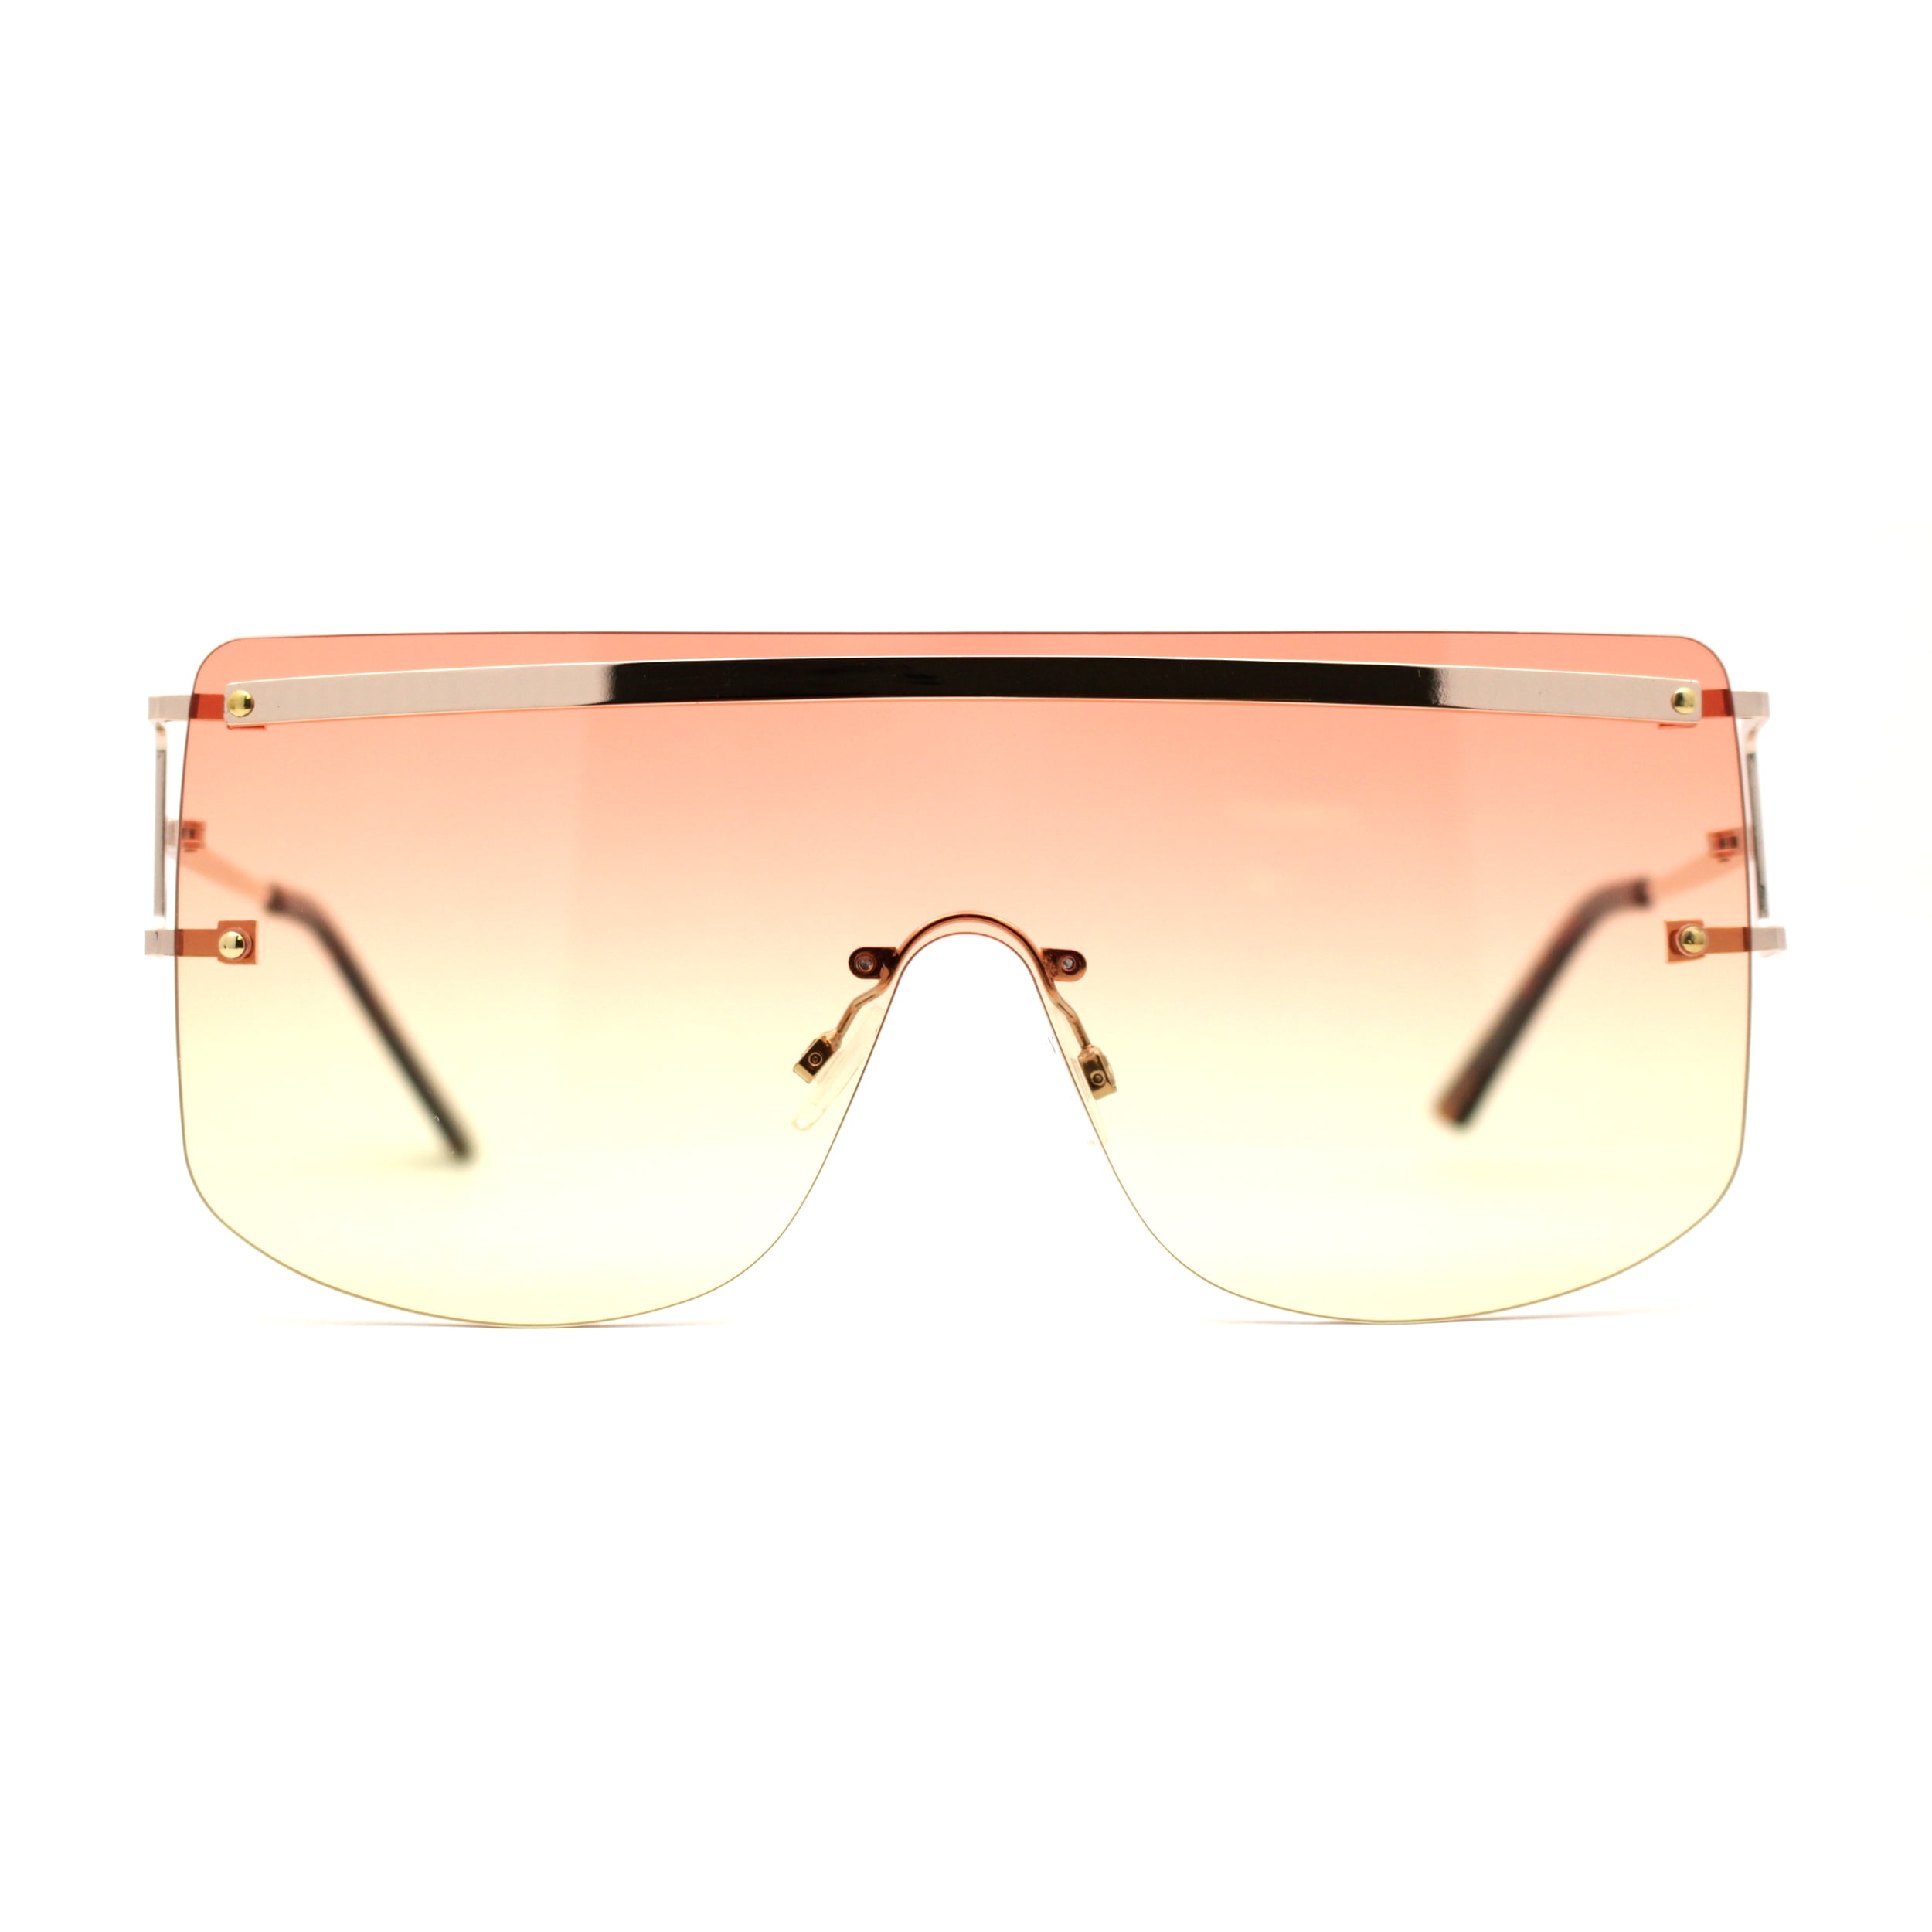 Luxurious Oversize Rimless Shield Flat Top Mobster Sunglasses Gold ...